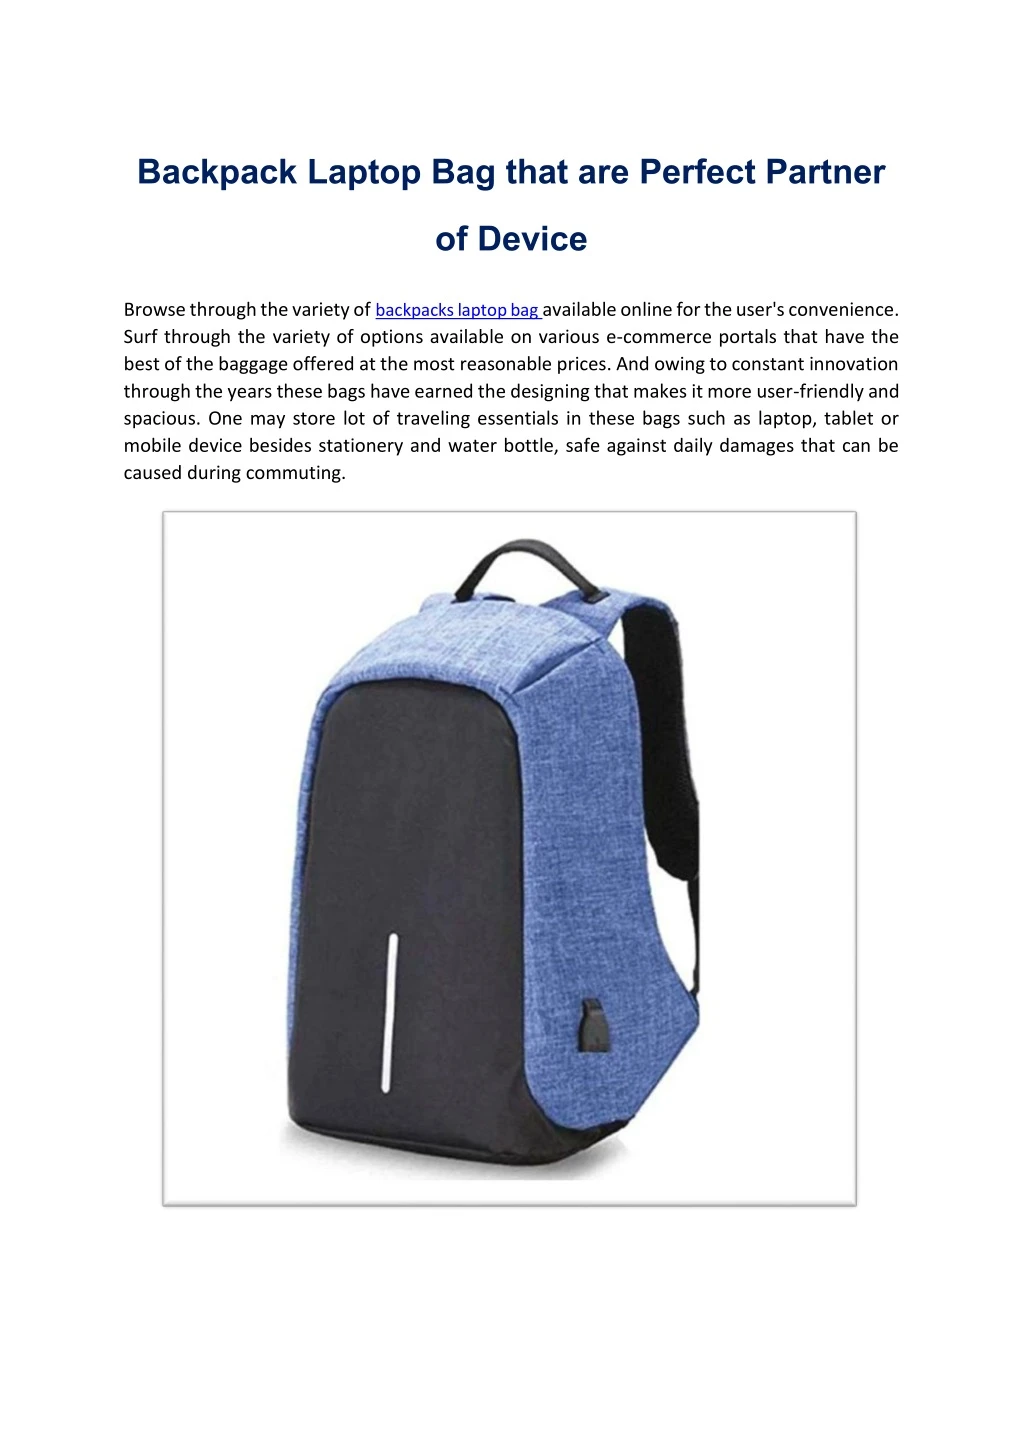 backpack laptop bag that are perfect partner